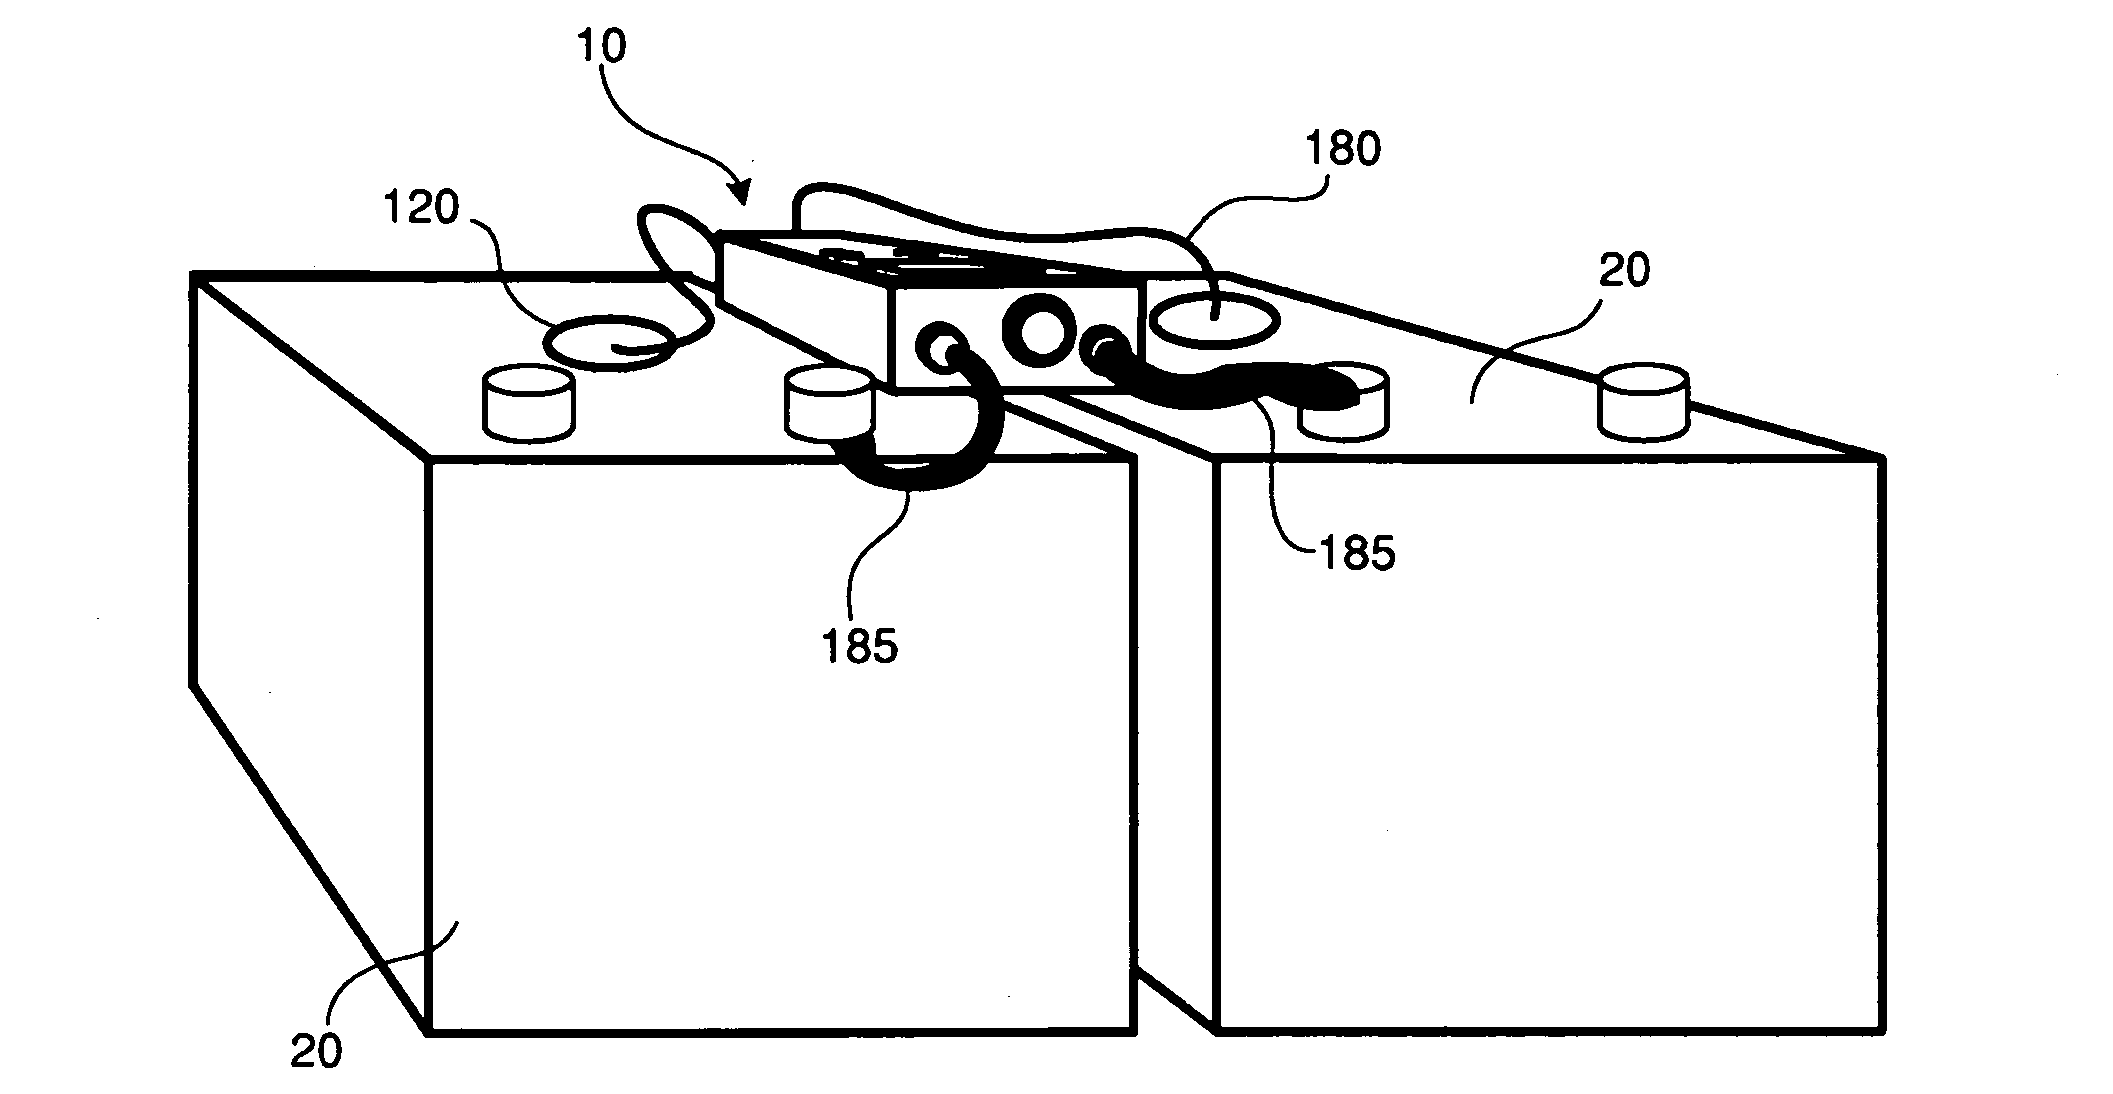 Battery monitoring device